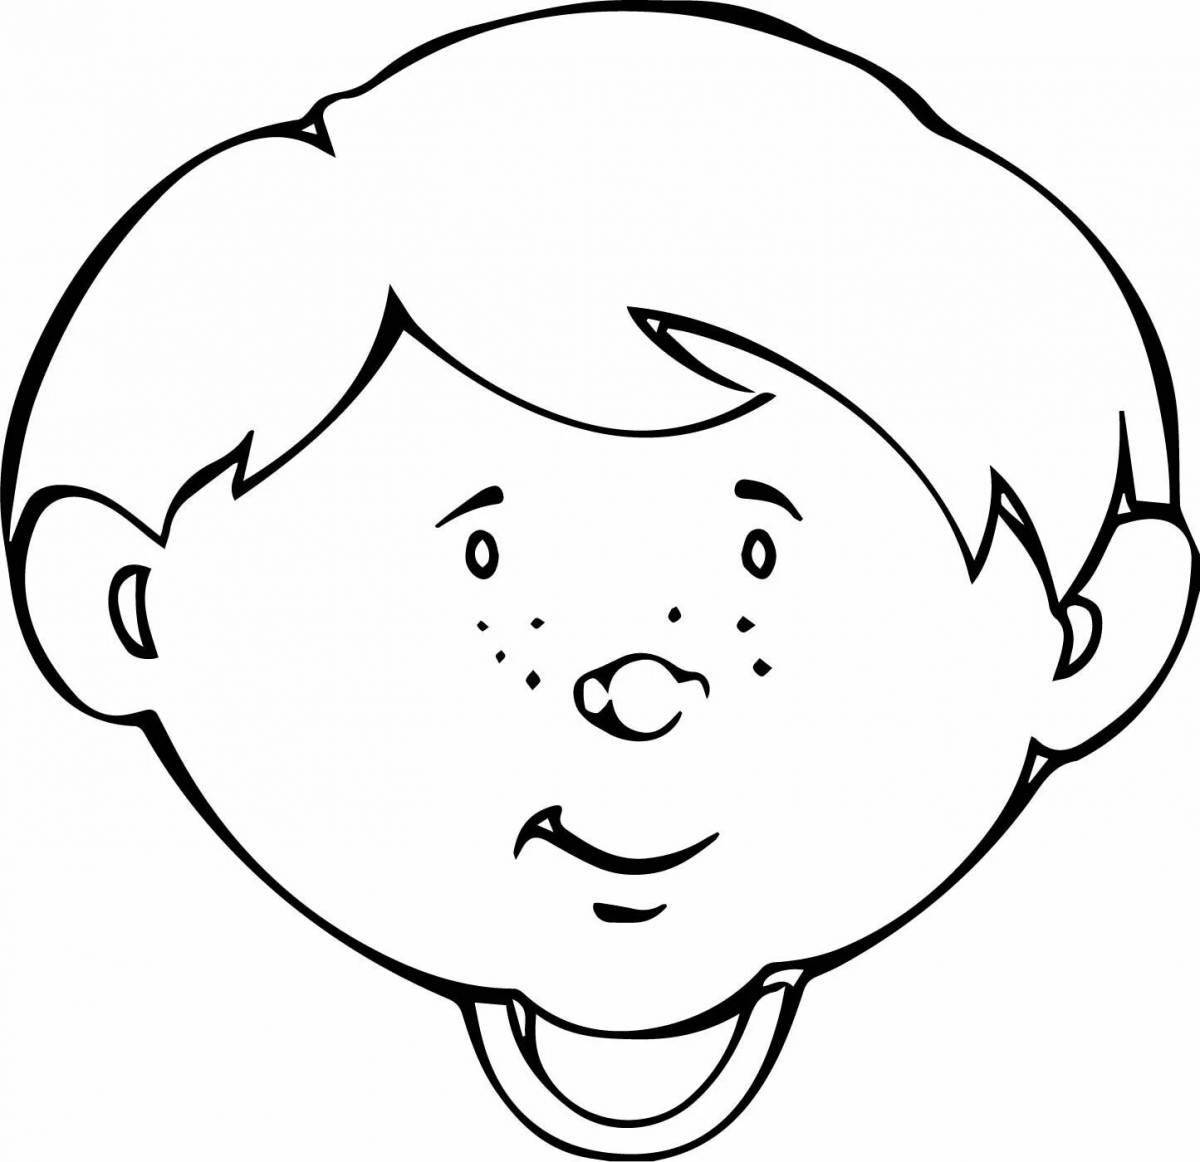 Coloring pages of grinning faces of people